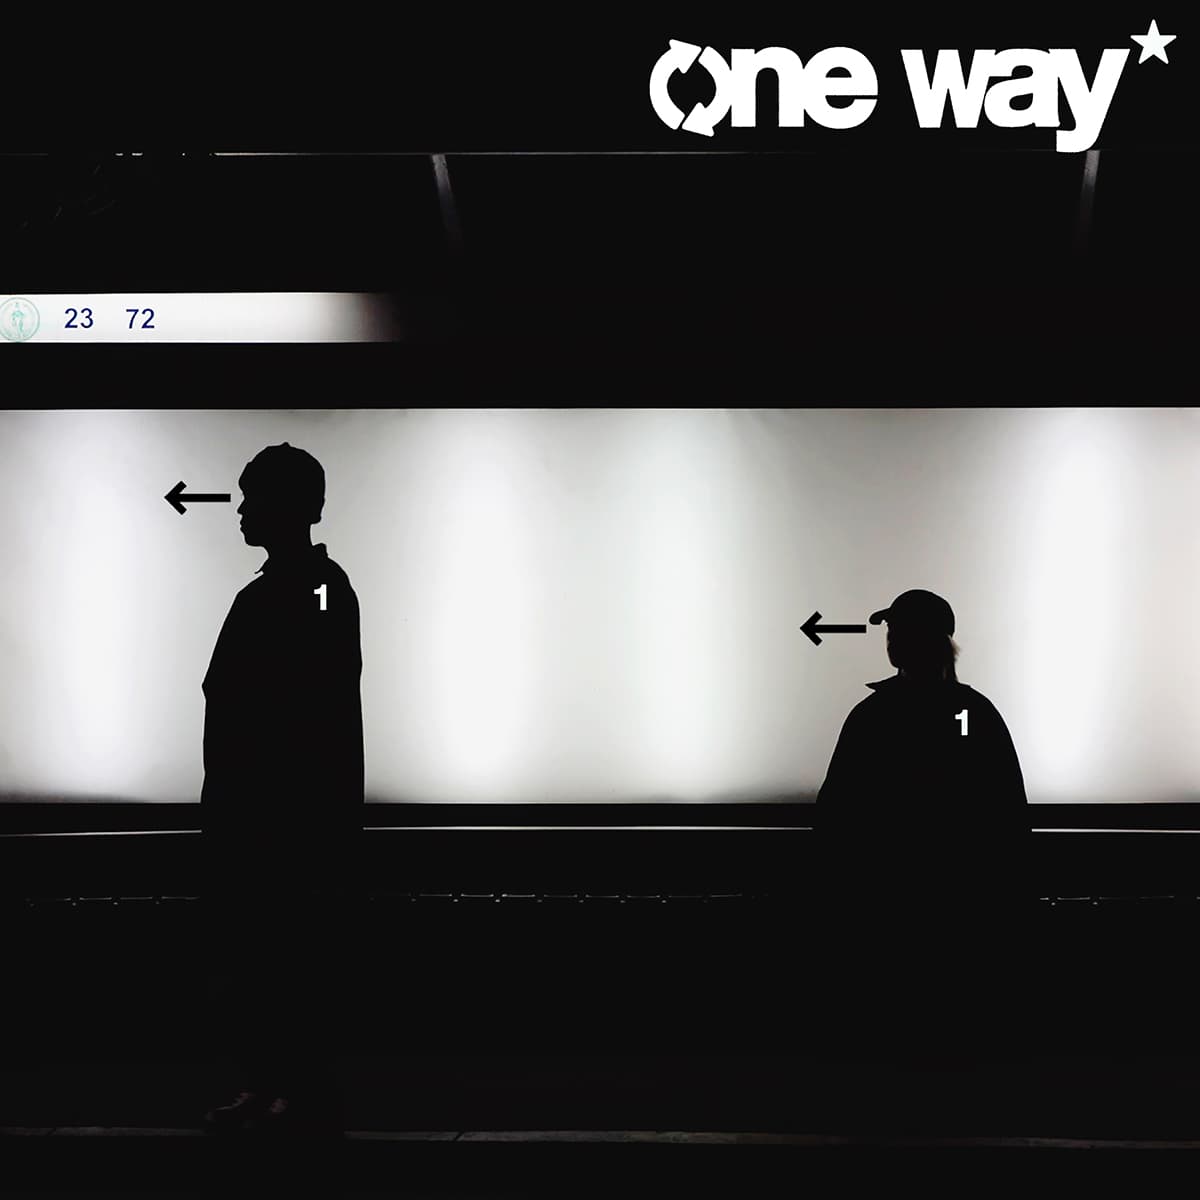 Bleecker Chrome releases new single "one way"